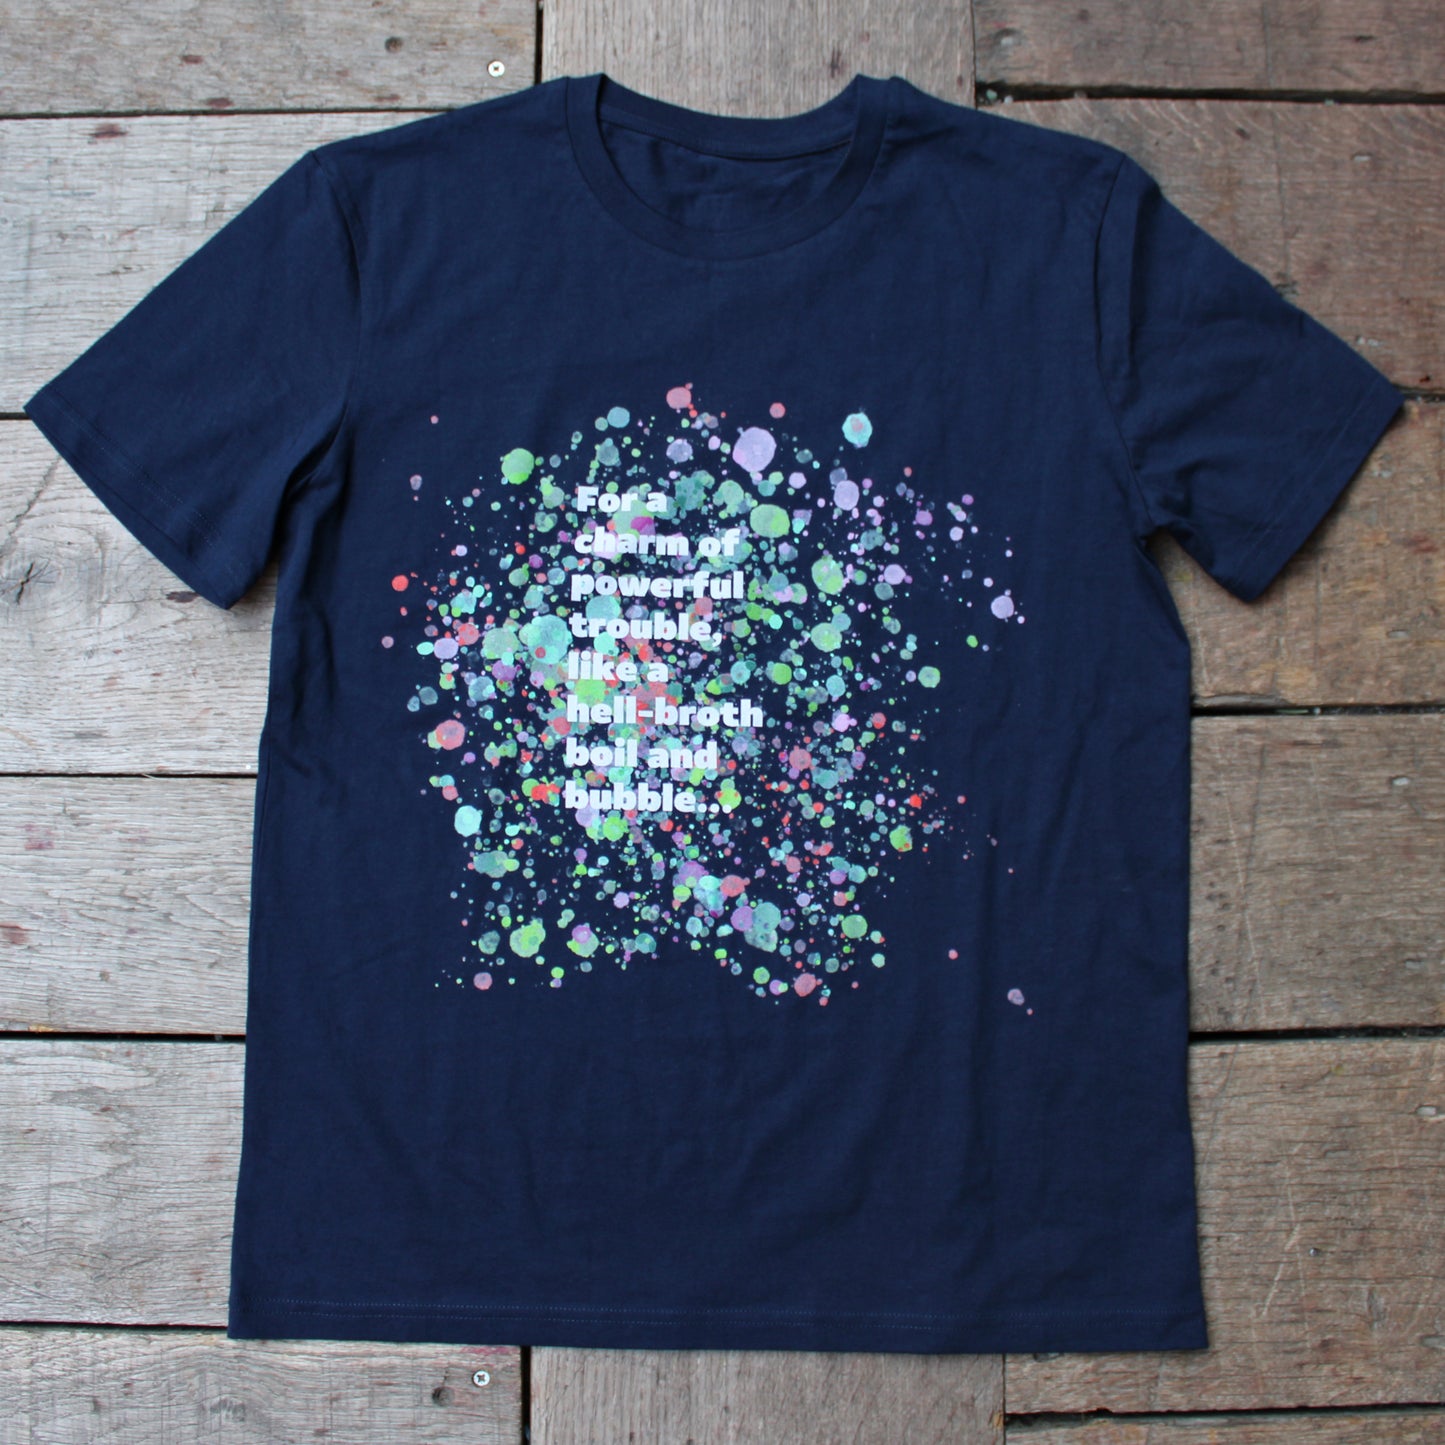 Navy blue t-shirt with pale blue, green, pink and purple bubbles behind white graphic text